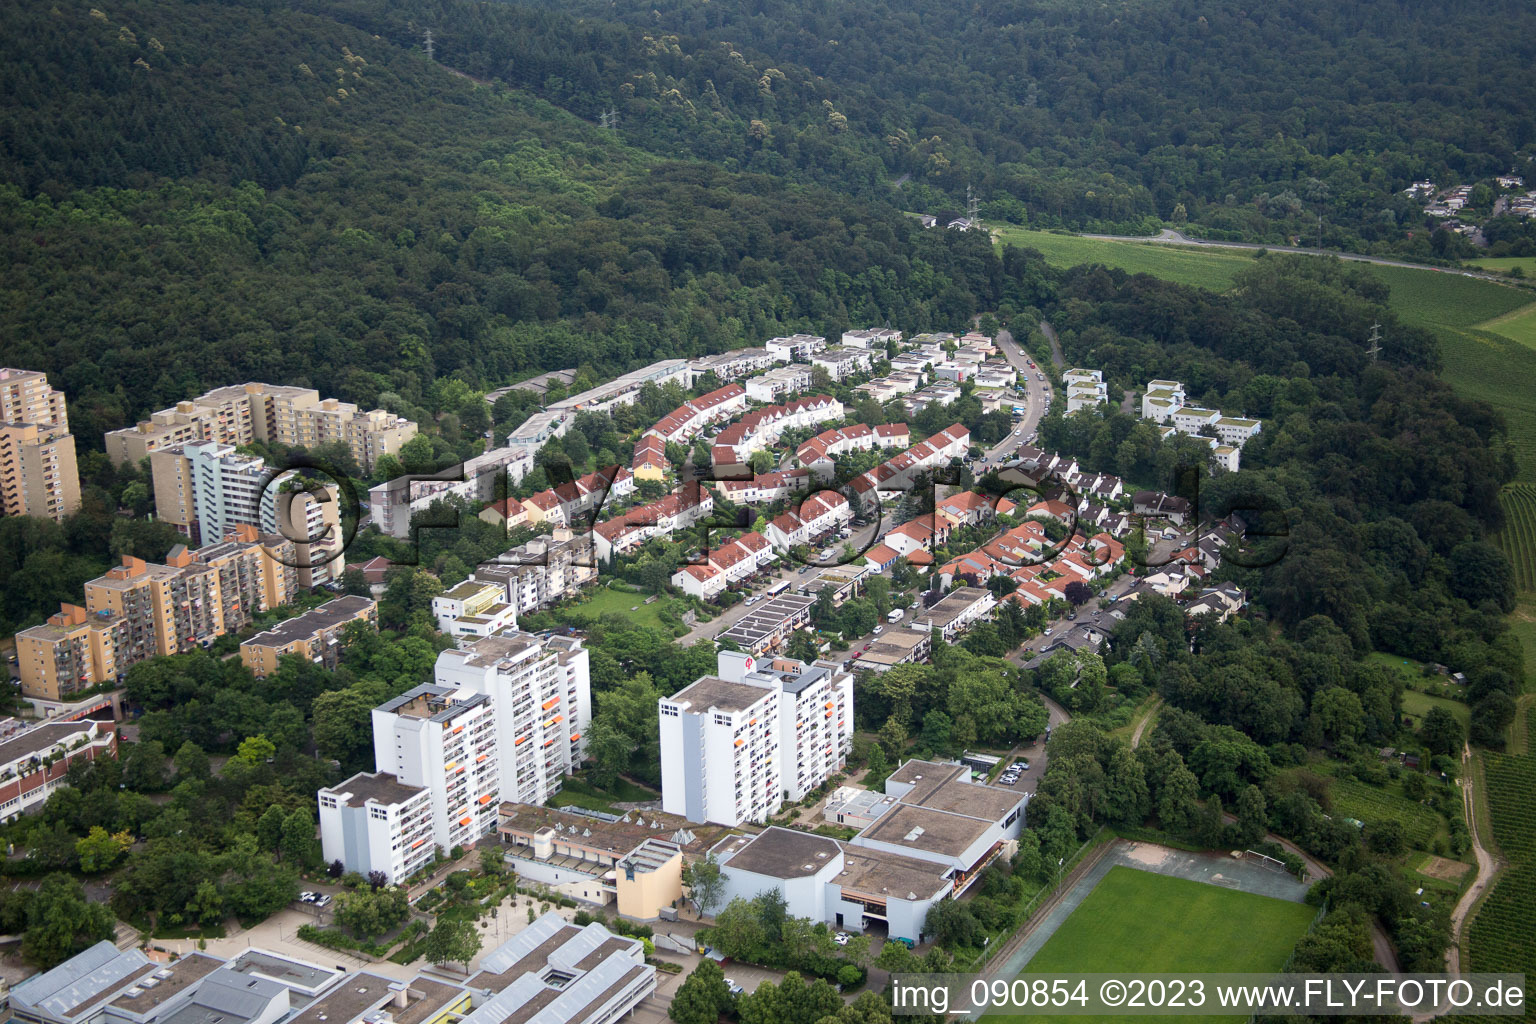 Oblique view of HD-Emmertsgrund in the district Emmertsgrund in Heidelberg in the state Baden-Wuerttemberg, Germany